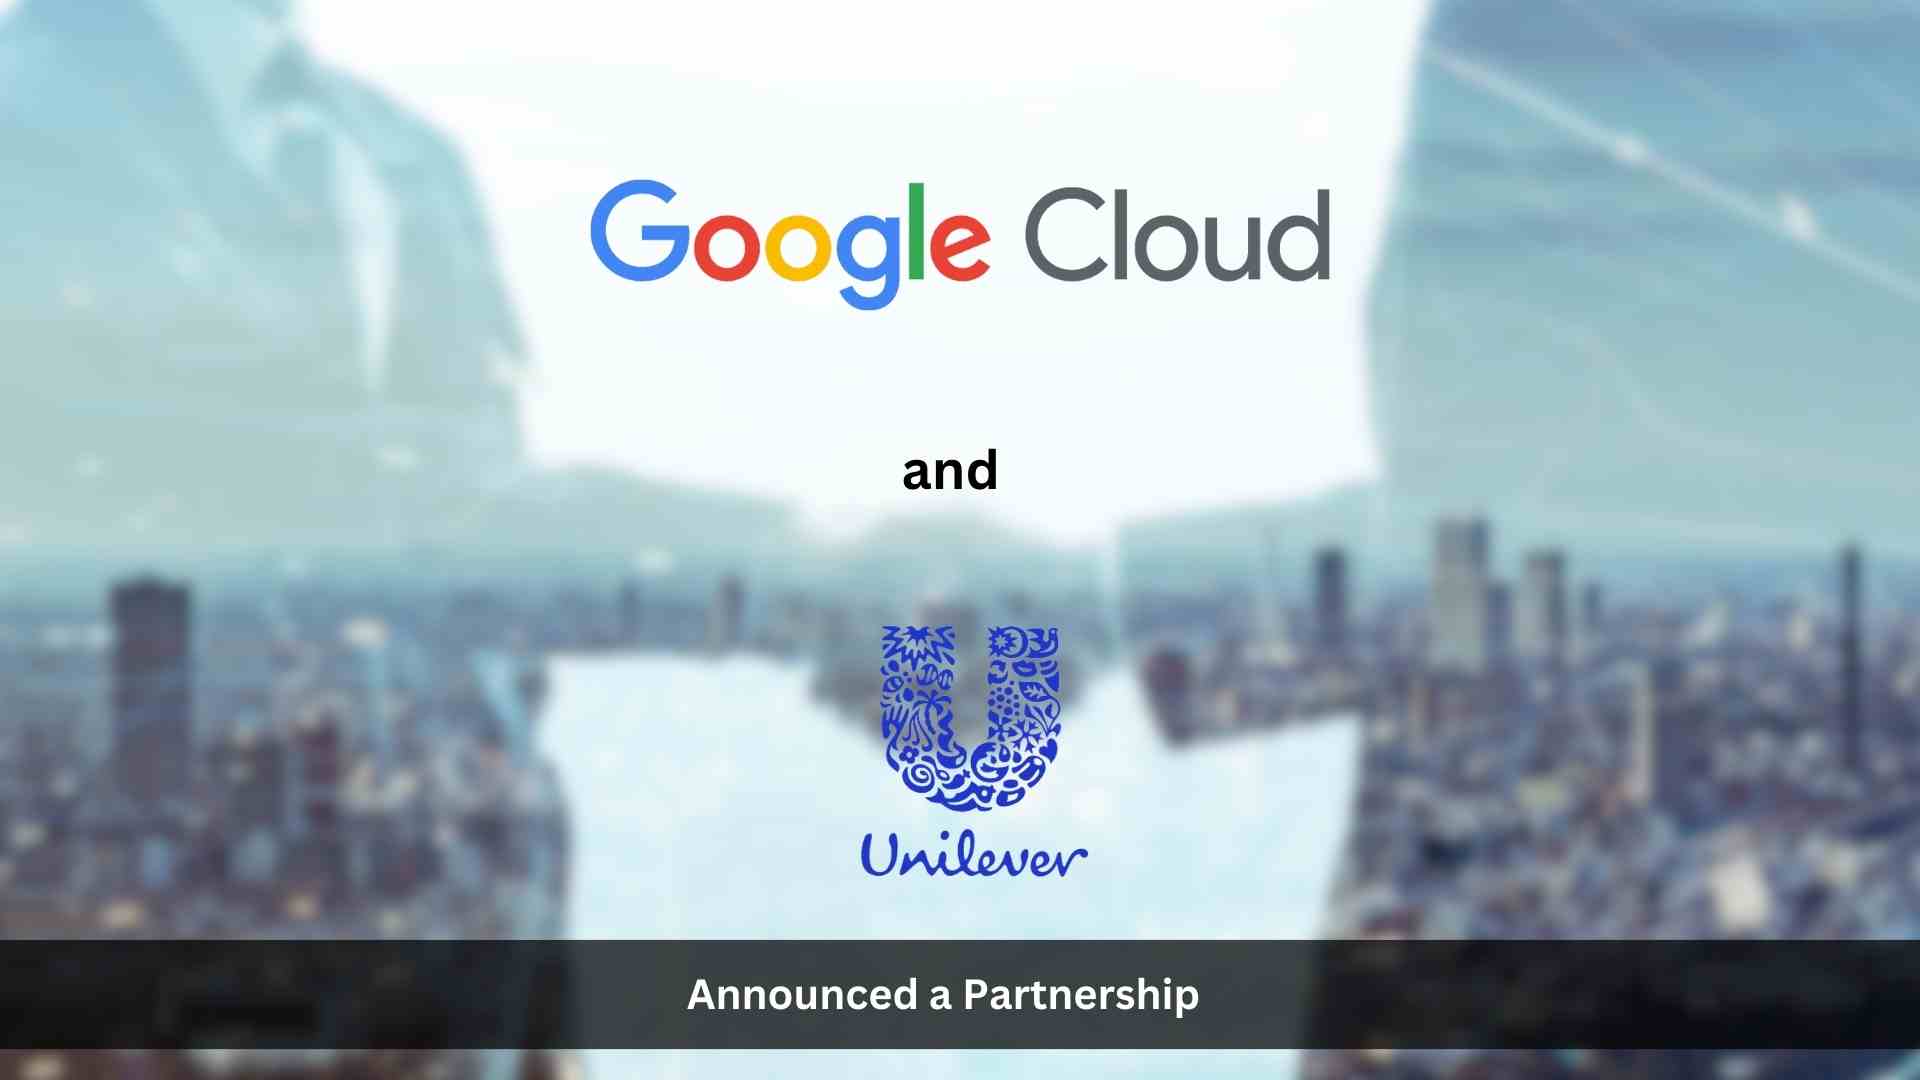 Google Cloud and Unilever partner to digitally connect factory-based colleagues with the new My Unilever app